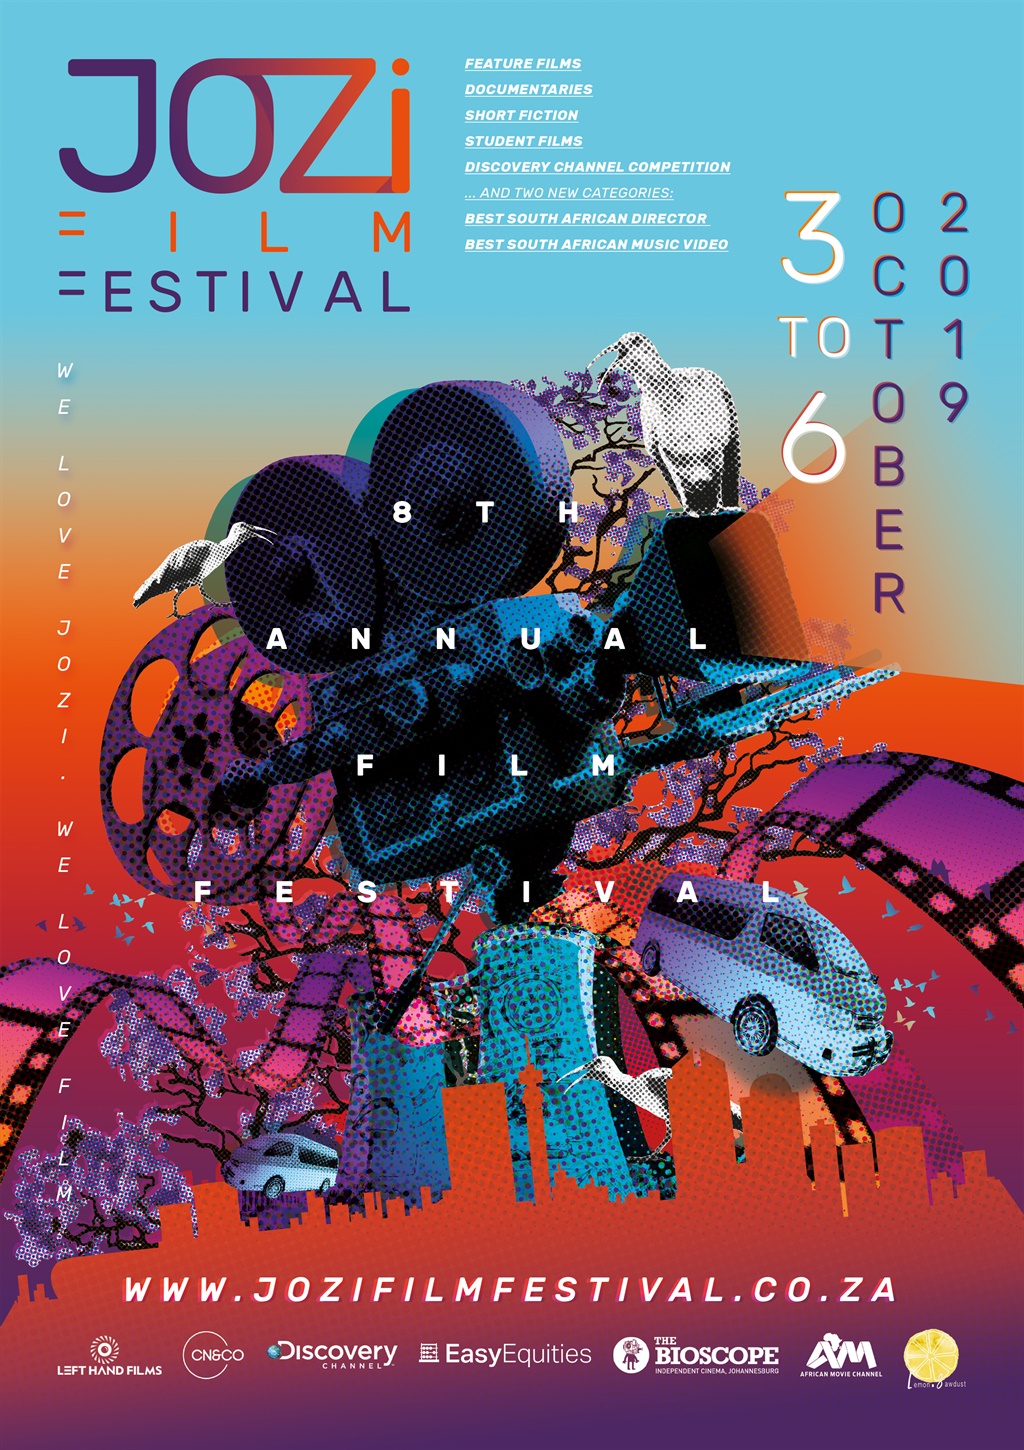 The Jozi Film Festival, not to be confused with the beleaguered Joburg Film Festival, is 100% independent.